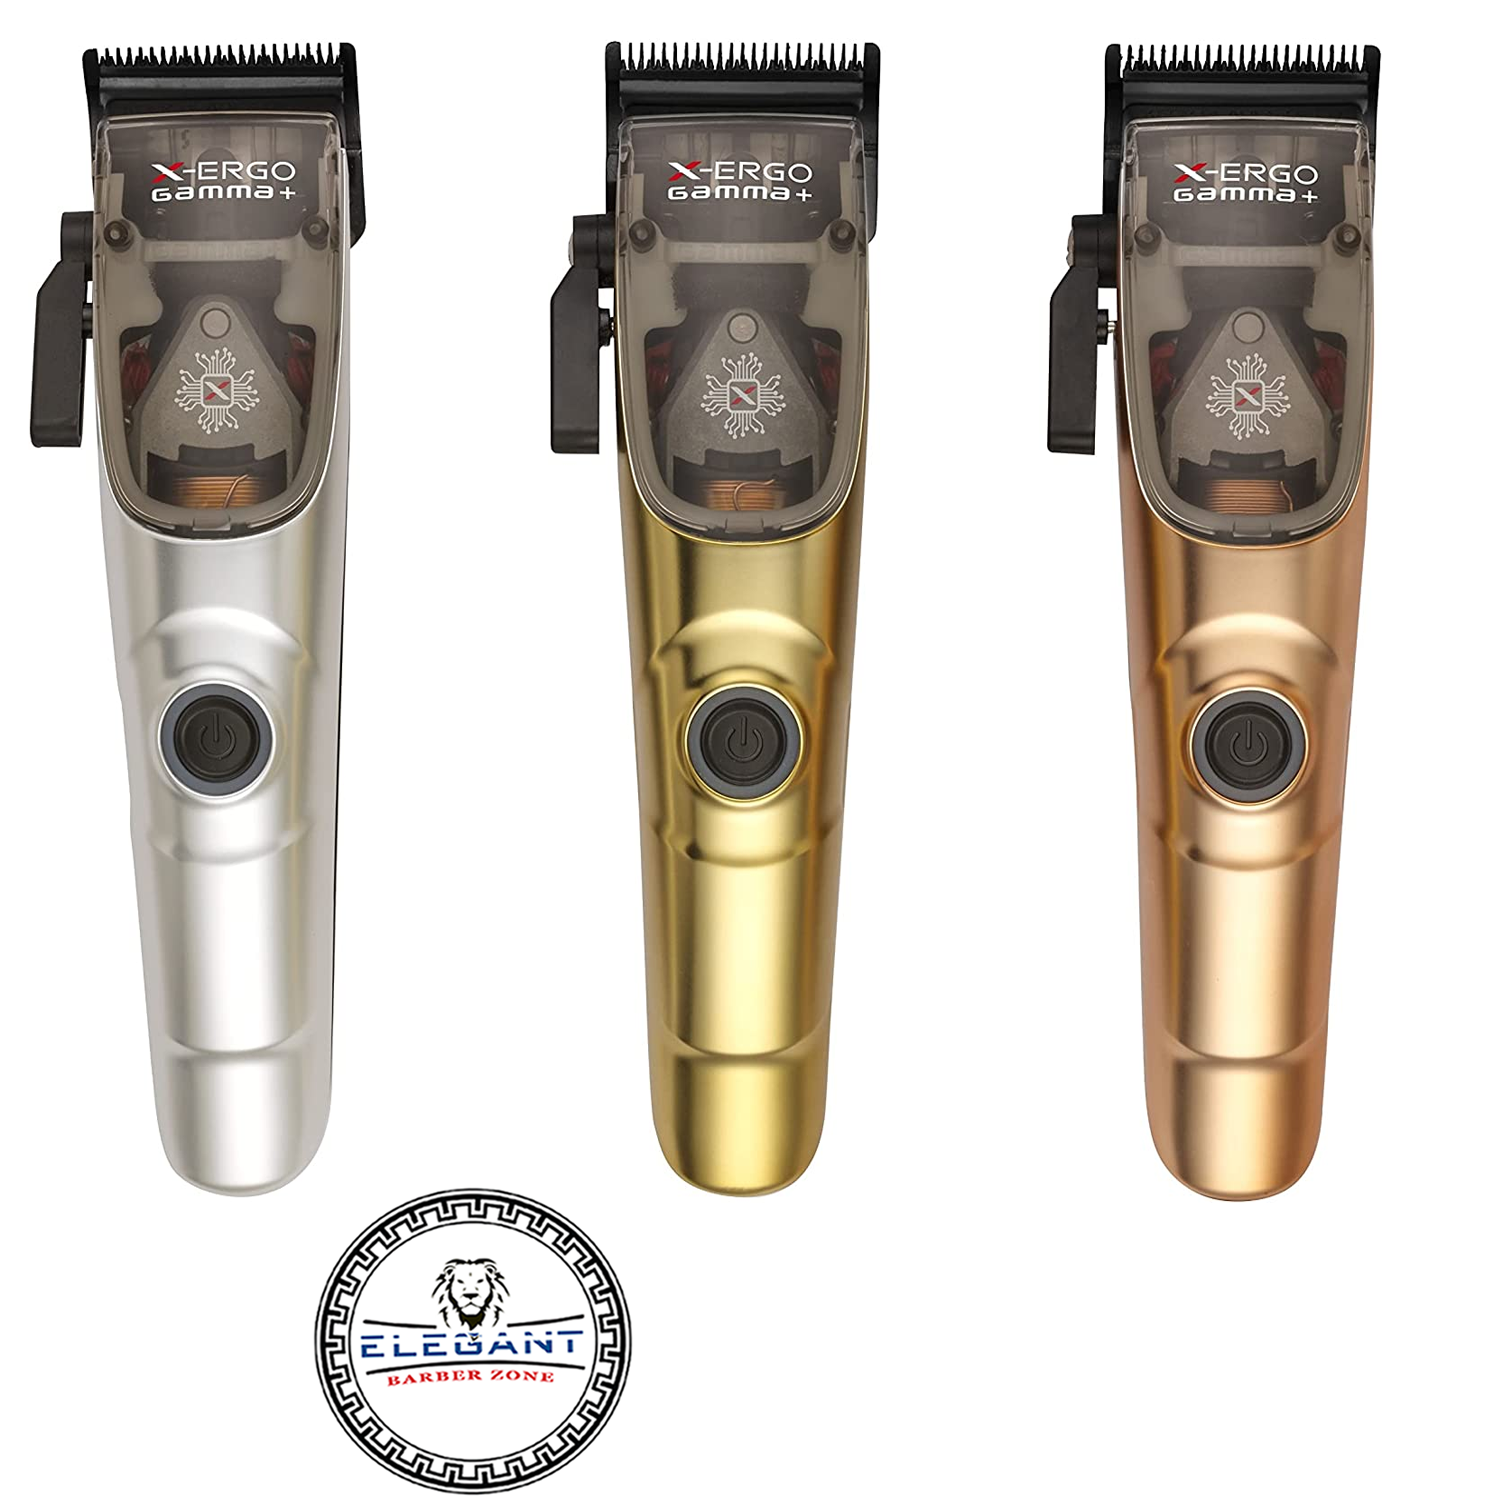 GAMMA  Ergo Professional Microchipped Magnetic Motor Clipper with Customizable Lids (Chrome, Rose Gold, Gold)